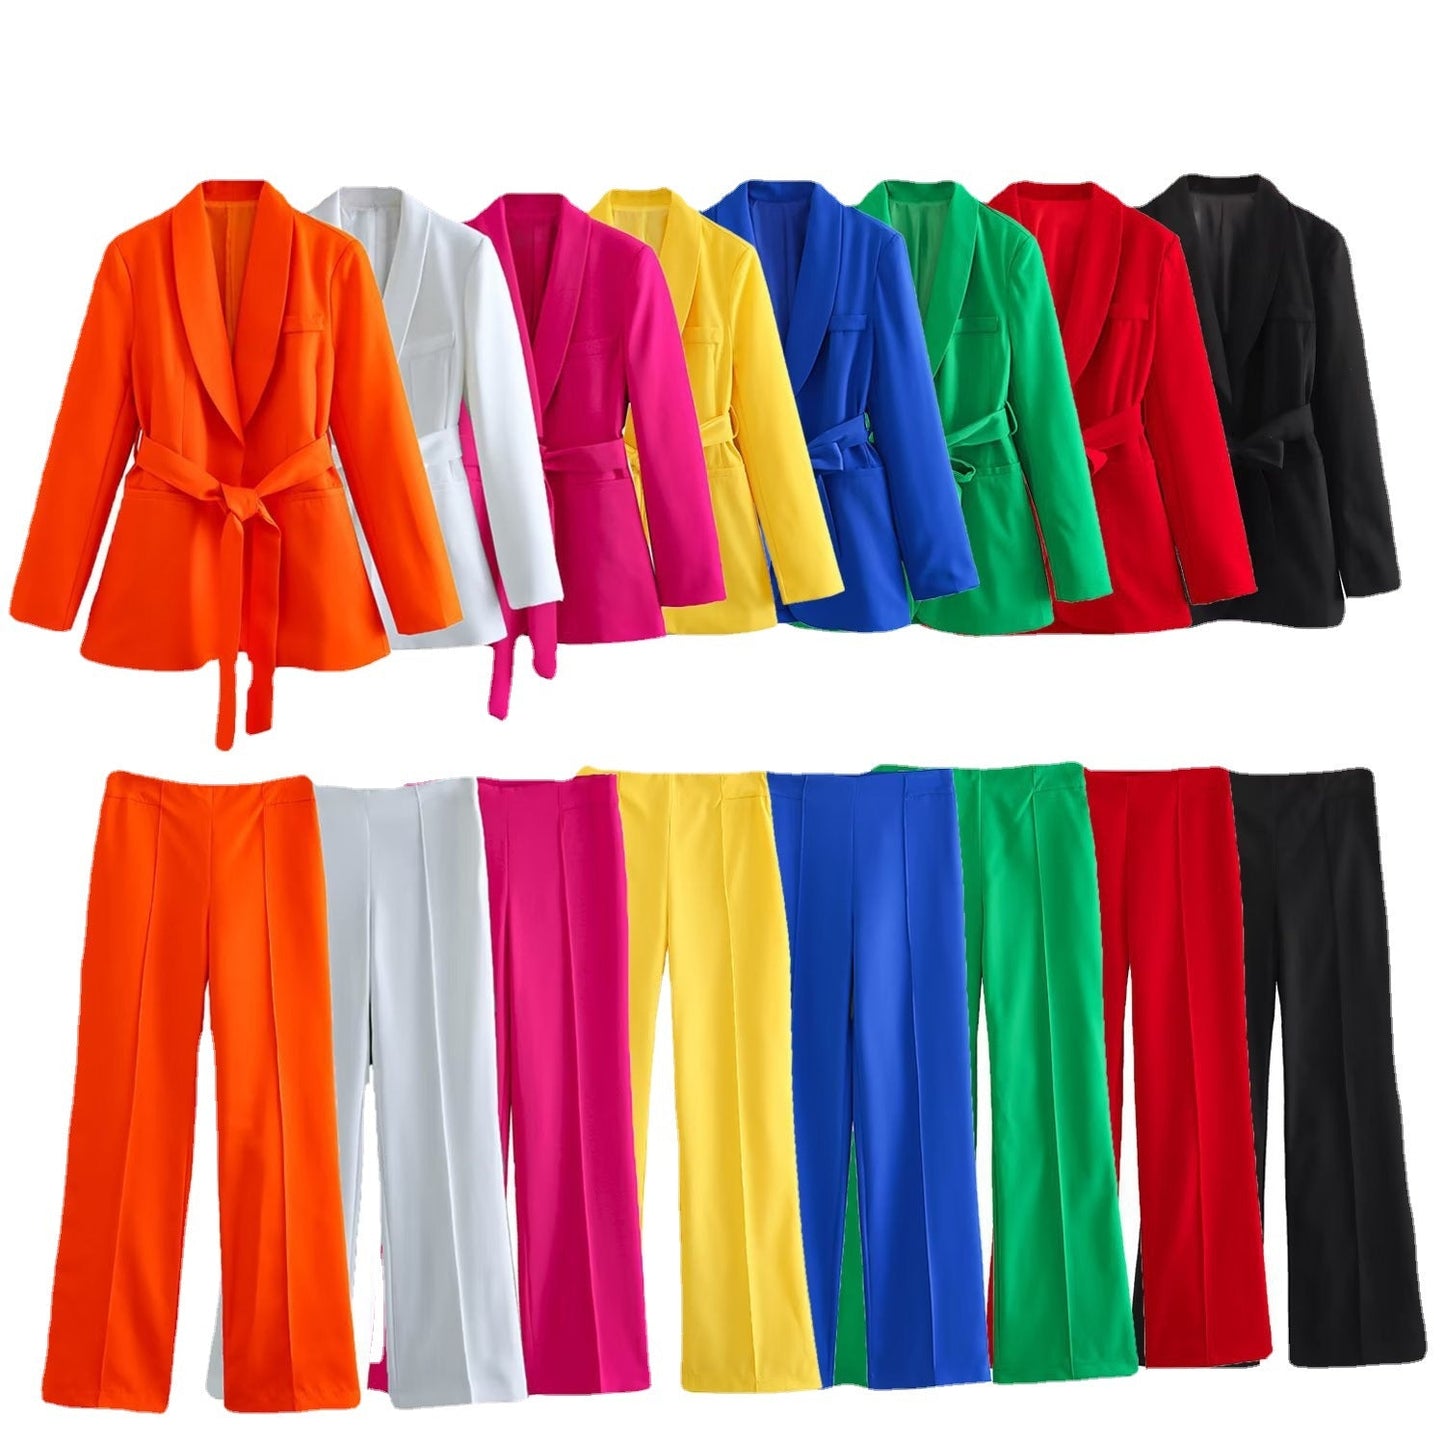 Fashion Women Blazers and Pants Suits